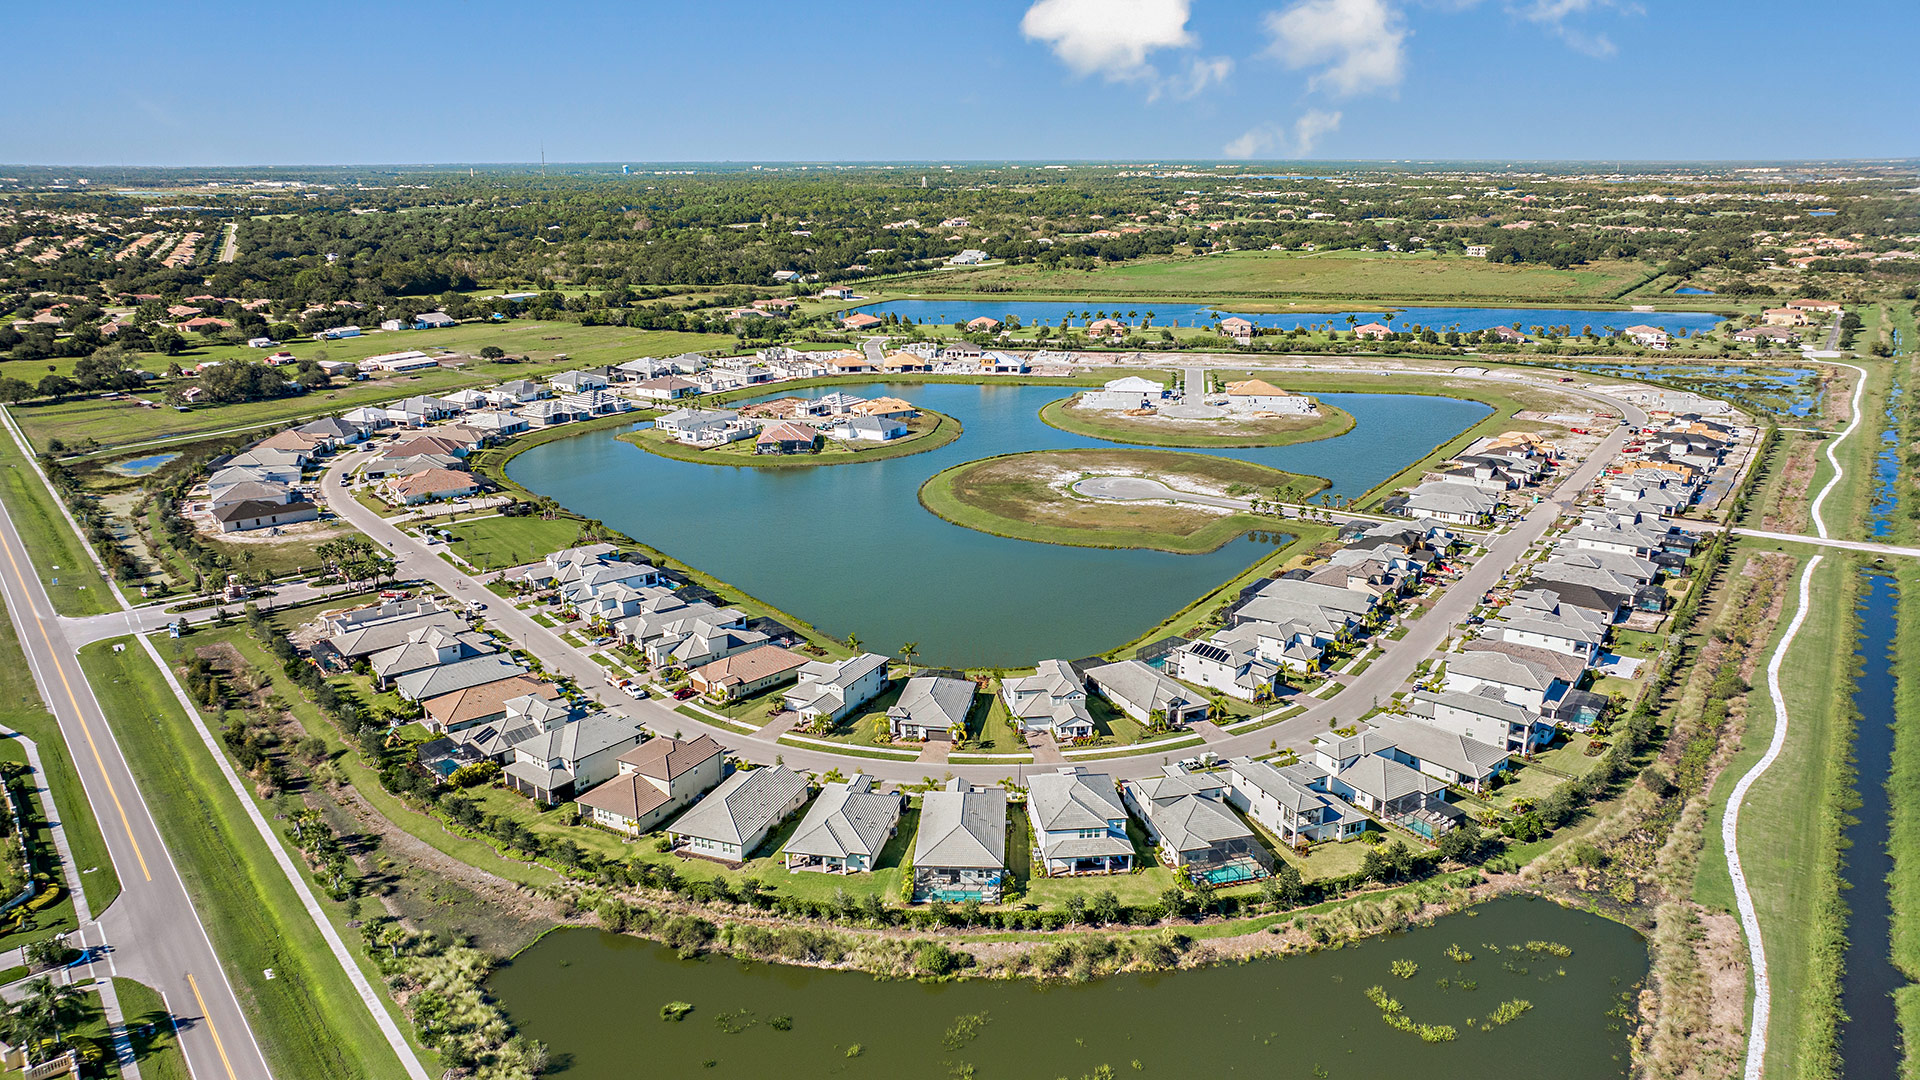 New Home Community With Amenities in Sarasota, FL